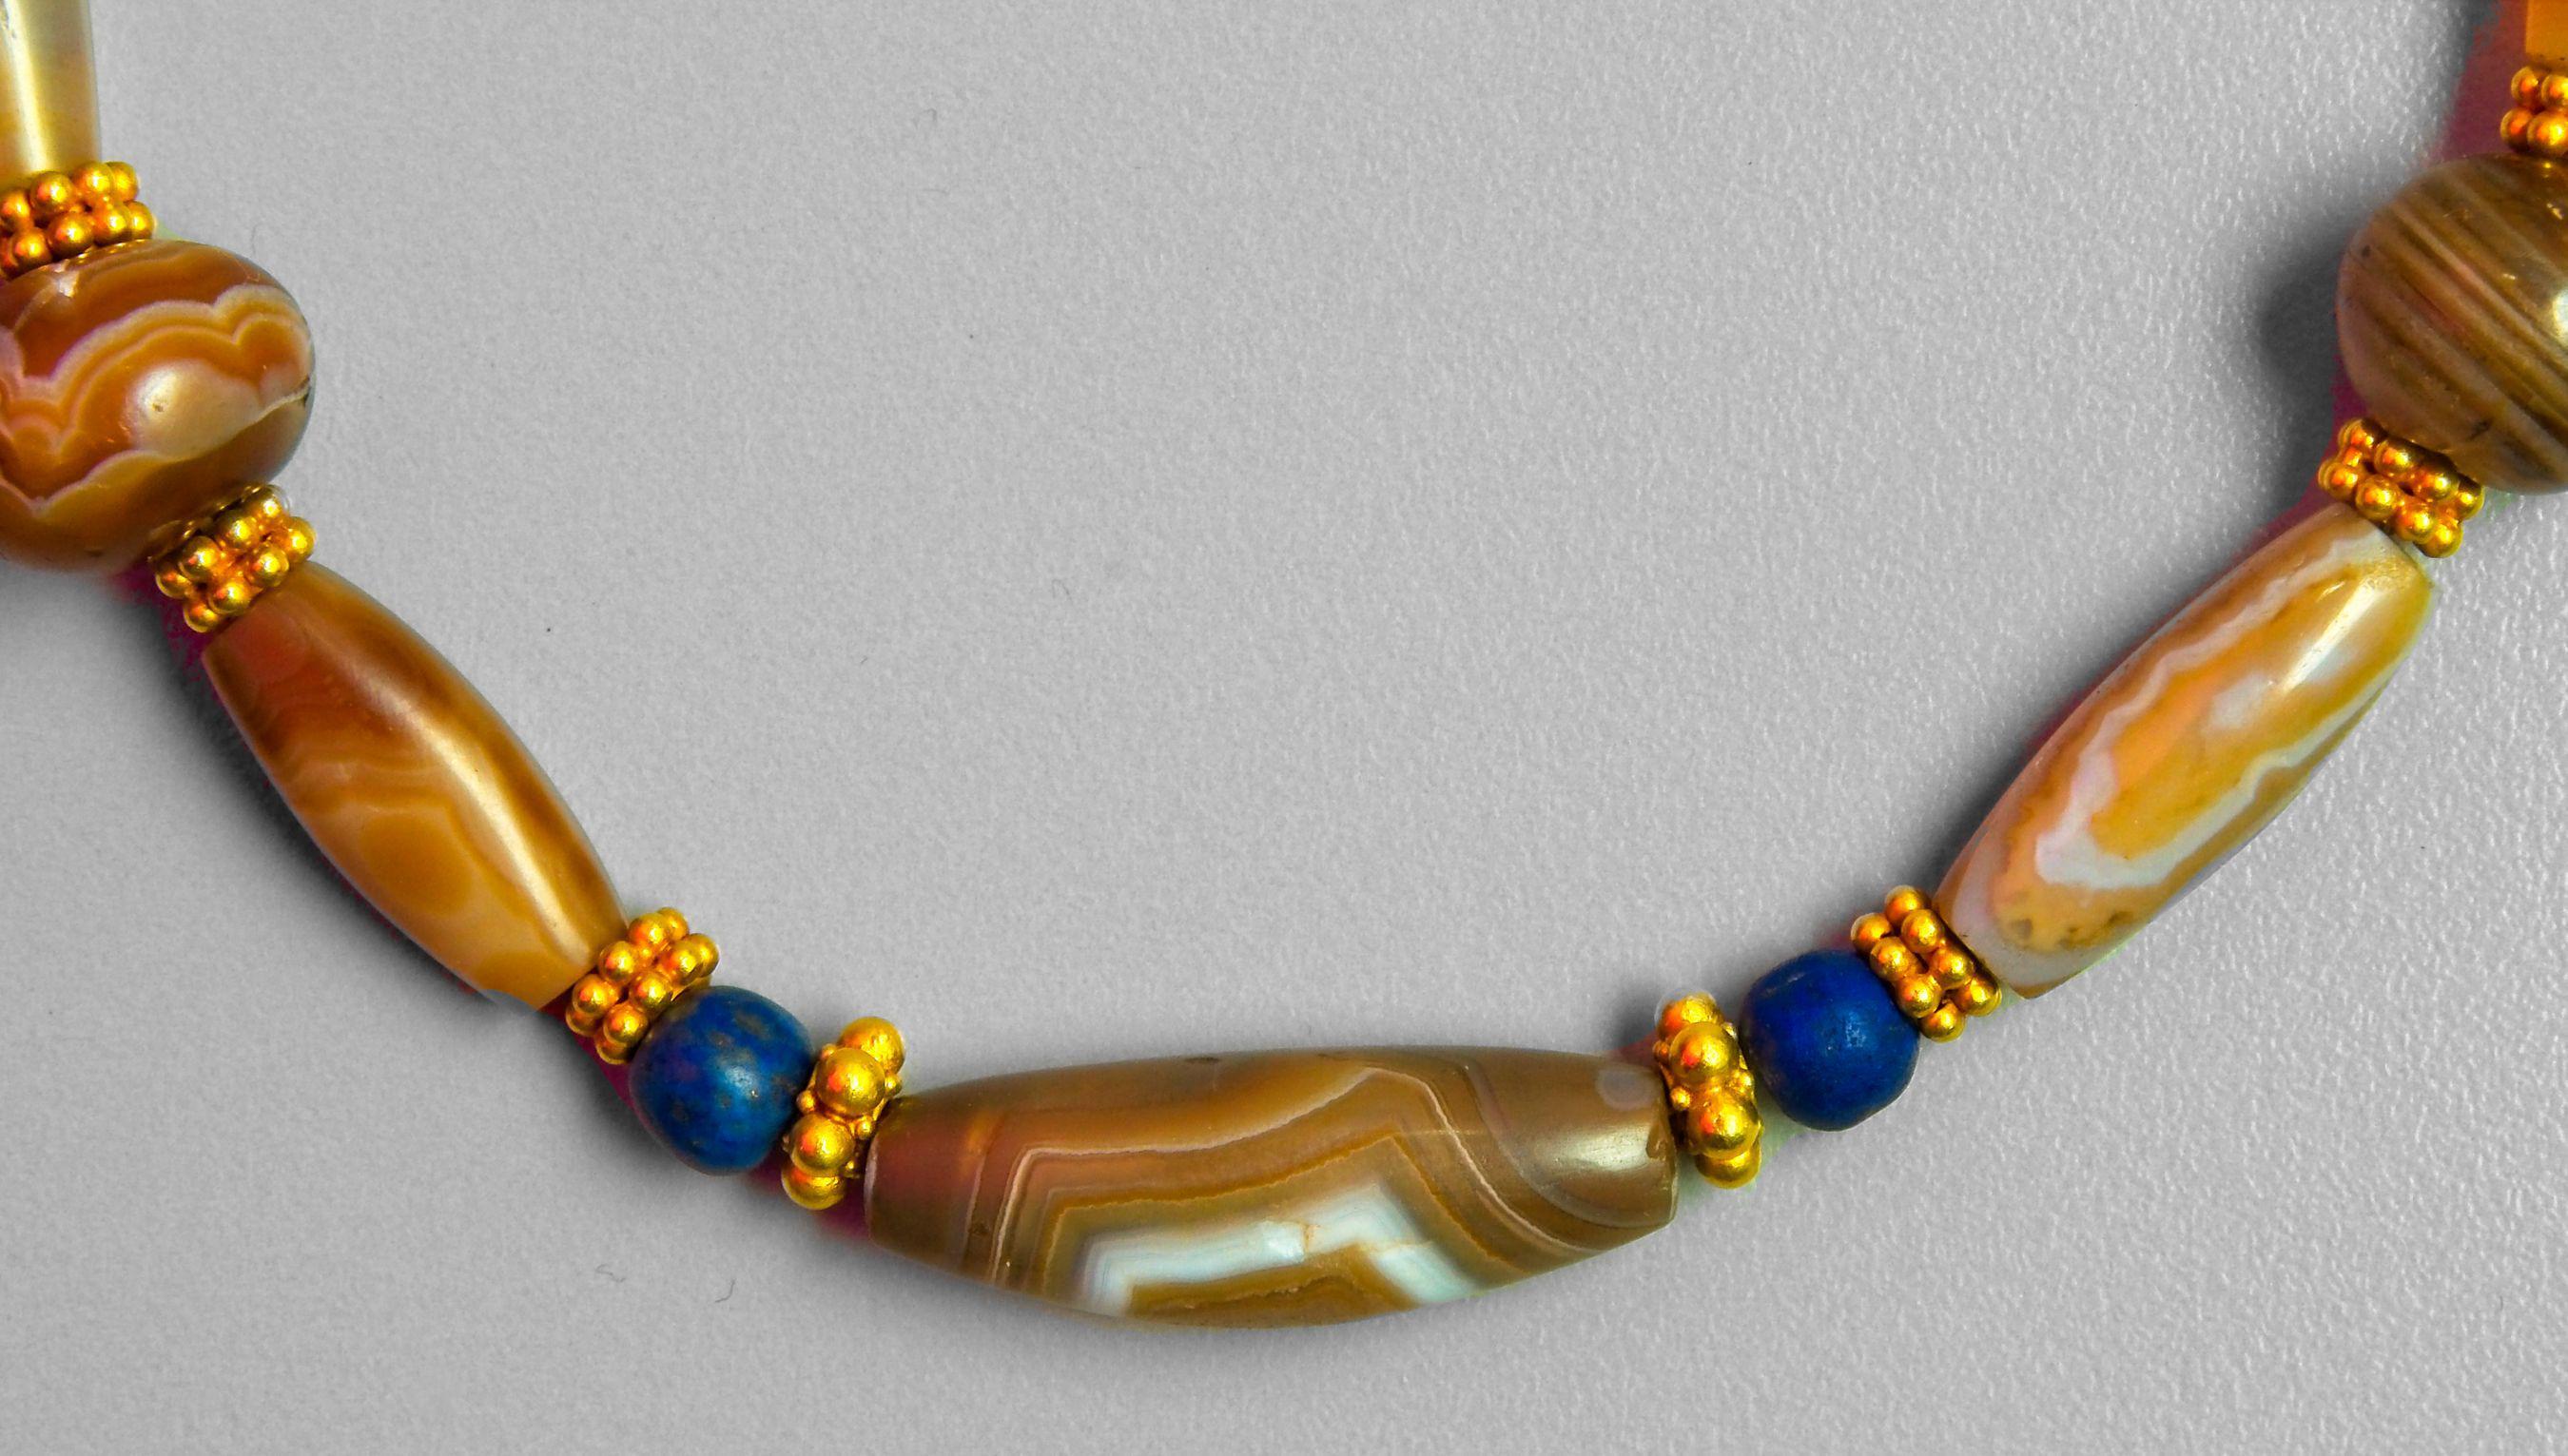 Ancient gold and agate beads from the period of the reign of Sennacherib, the king of ancient Assyria (704-681 B.C.). There are seventeen agate and agate/carnelian beads, four lapis lazuli beads and twenty ancient gold beads. The clasp is the only